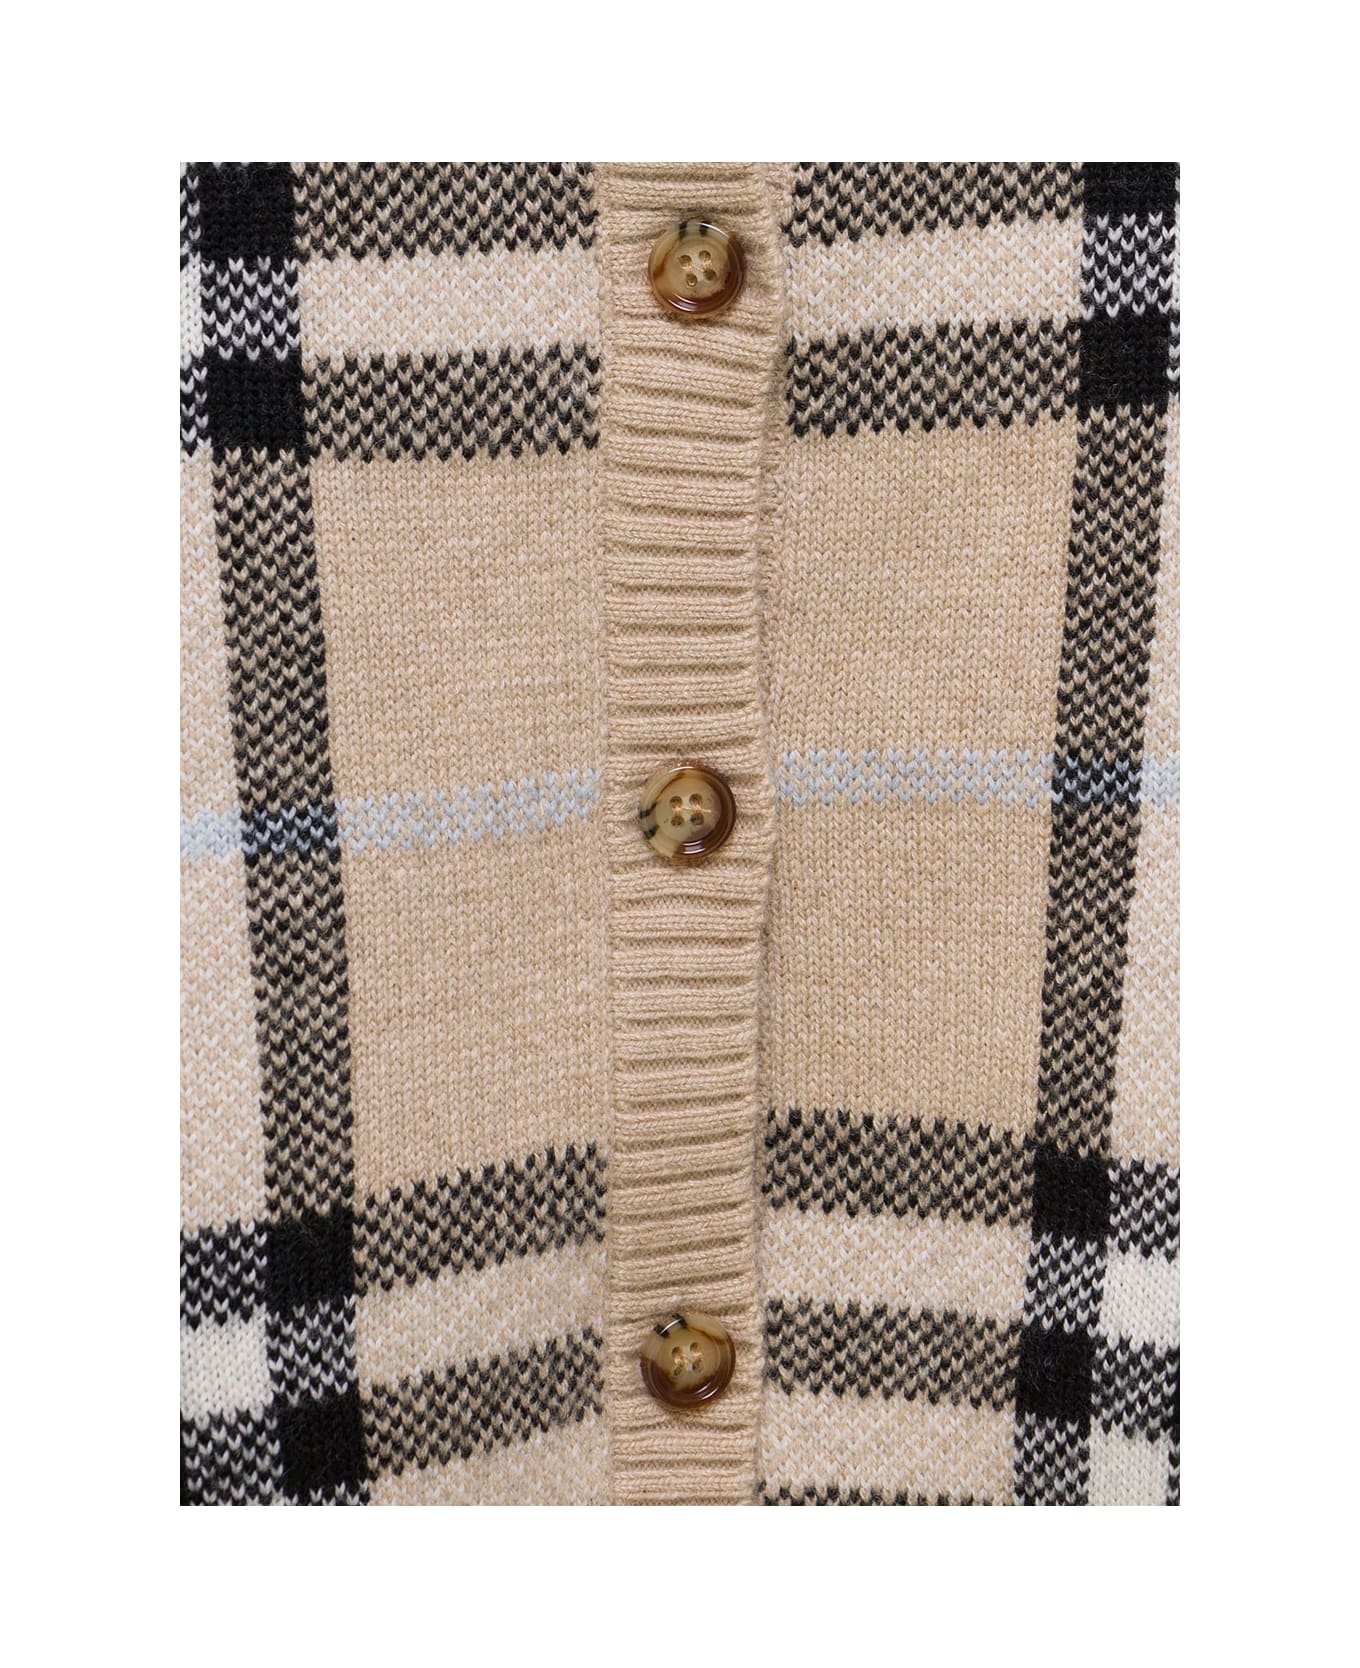 Burberry Beige Wool And Cachemire Cardigan With Vintage Check Motif Girl Burberry Kids - Beige